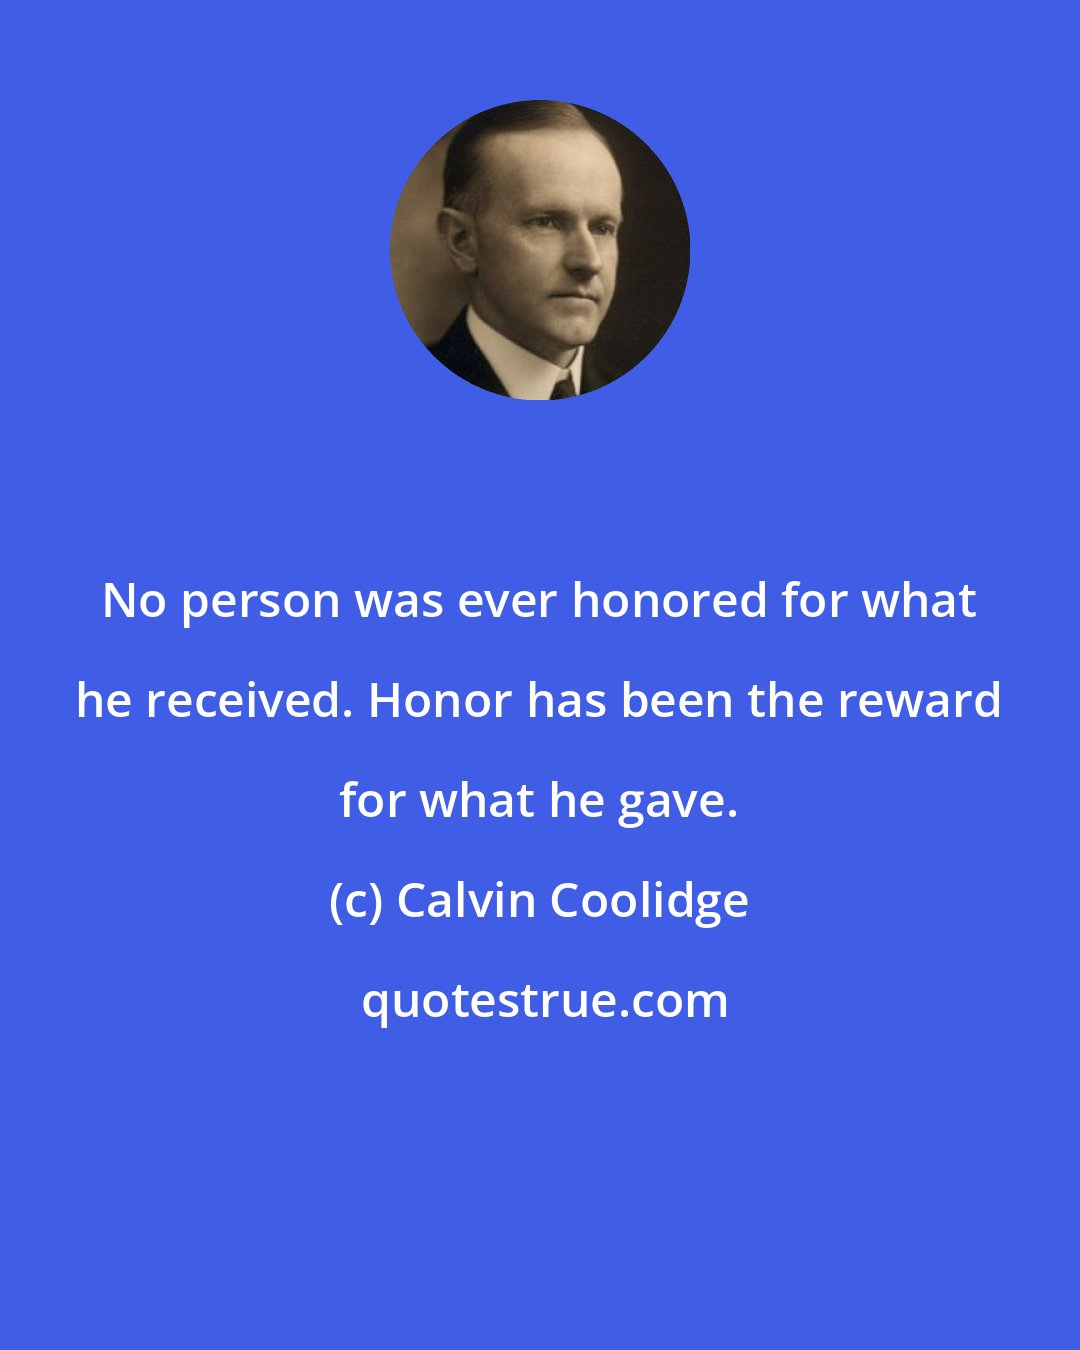 Calvin Coolidge: No person was ever honored for what he received. Honor has been the reward for what he gave.